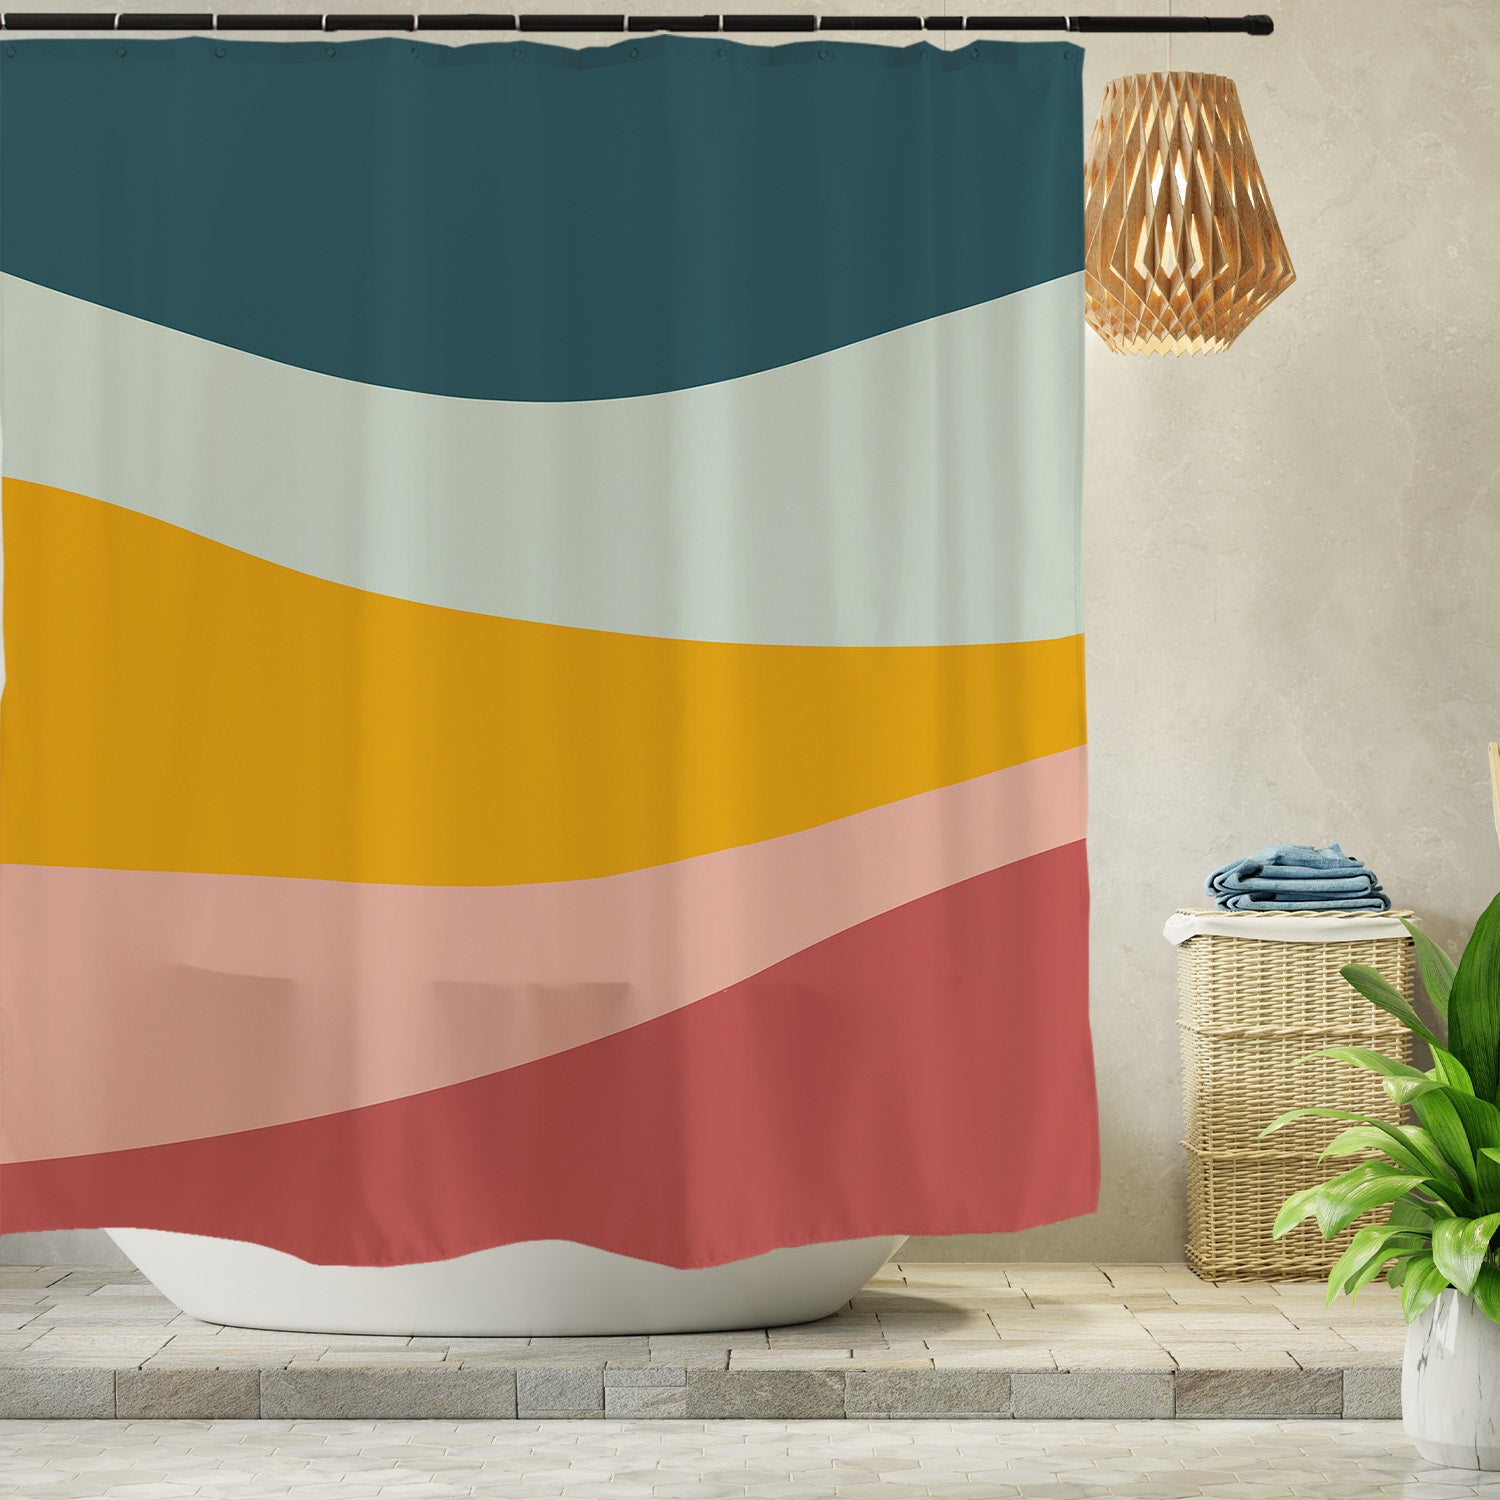 Feblilac Five Color Mountain Shower Curtain with Hooks